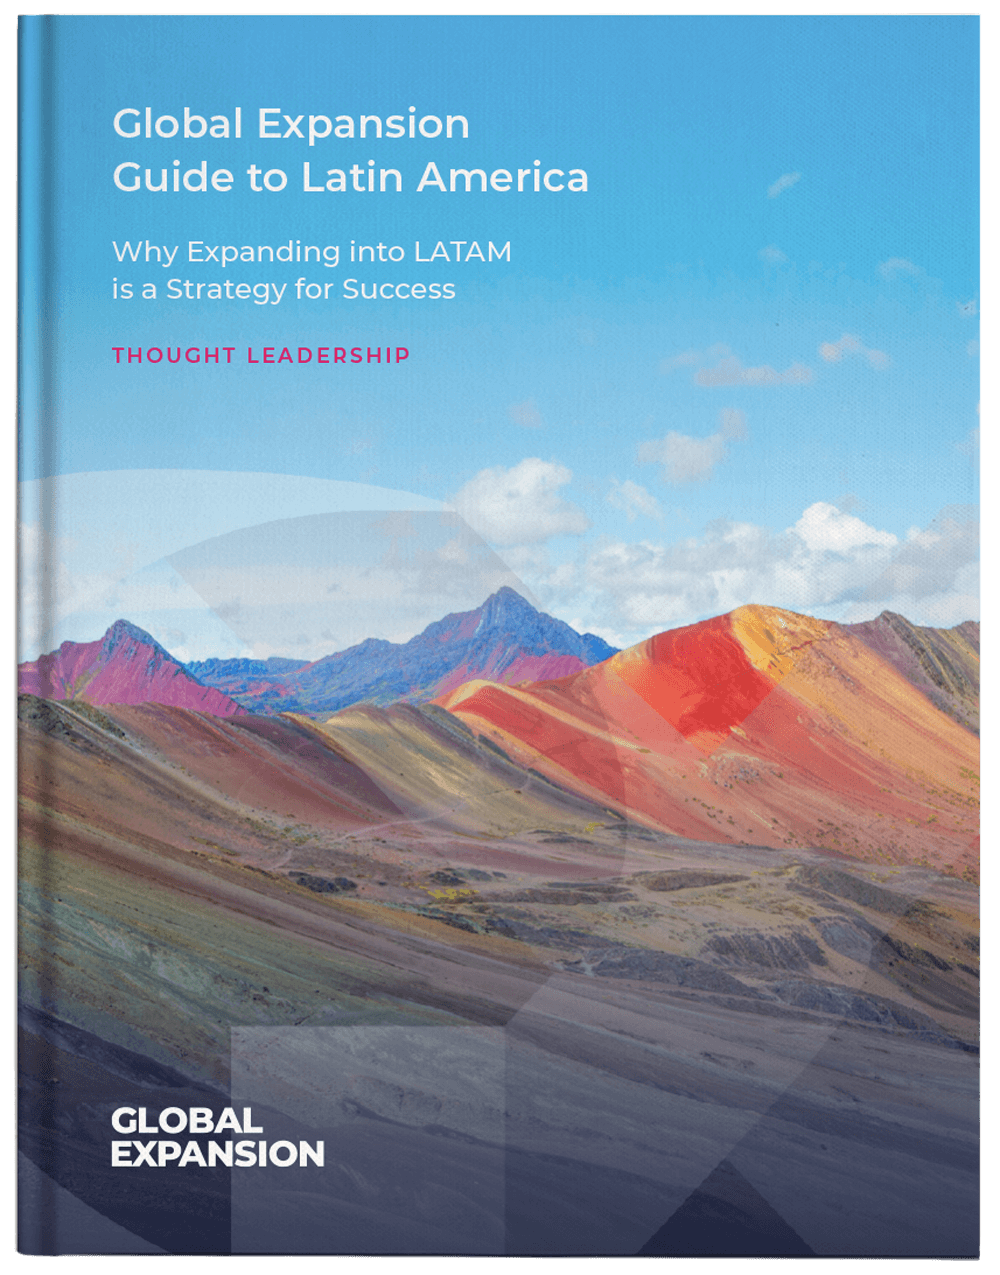 GX_Global-Expansion-Guide-to-Latin-America-Cover